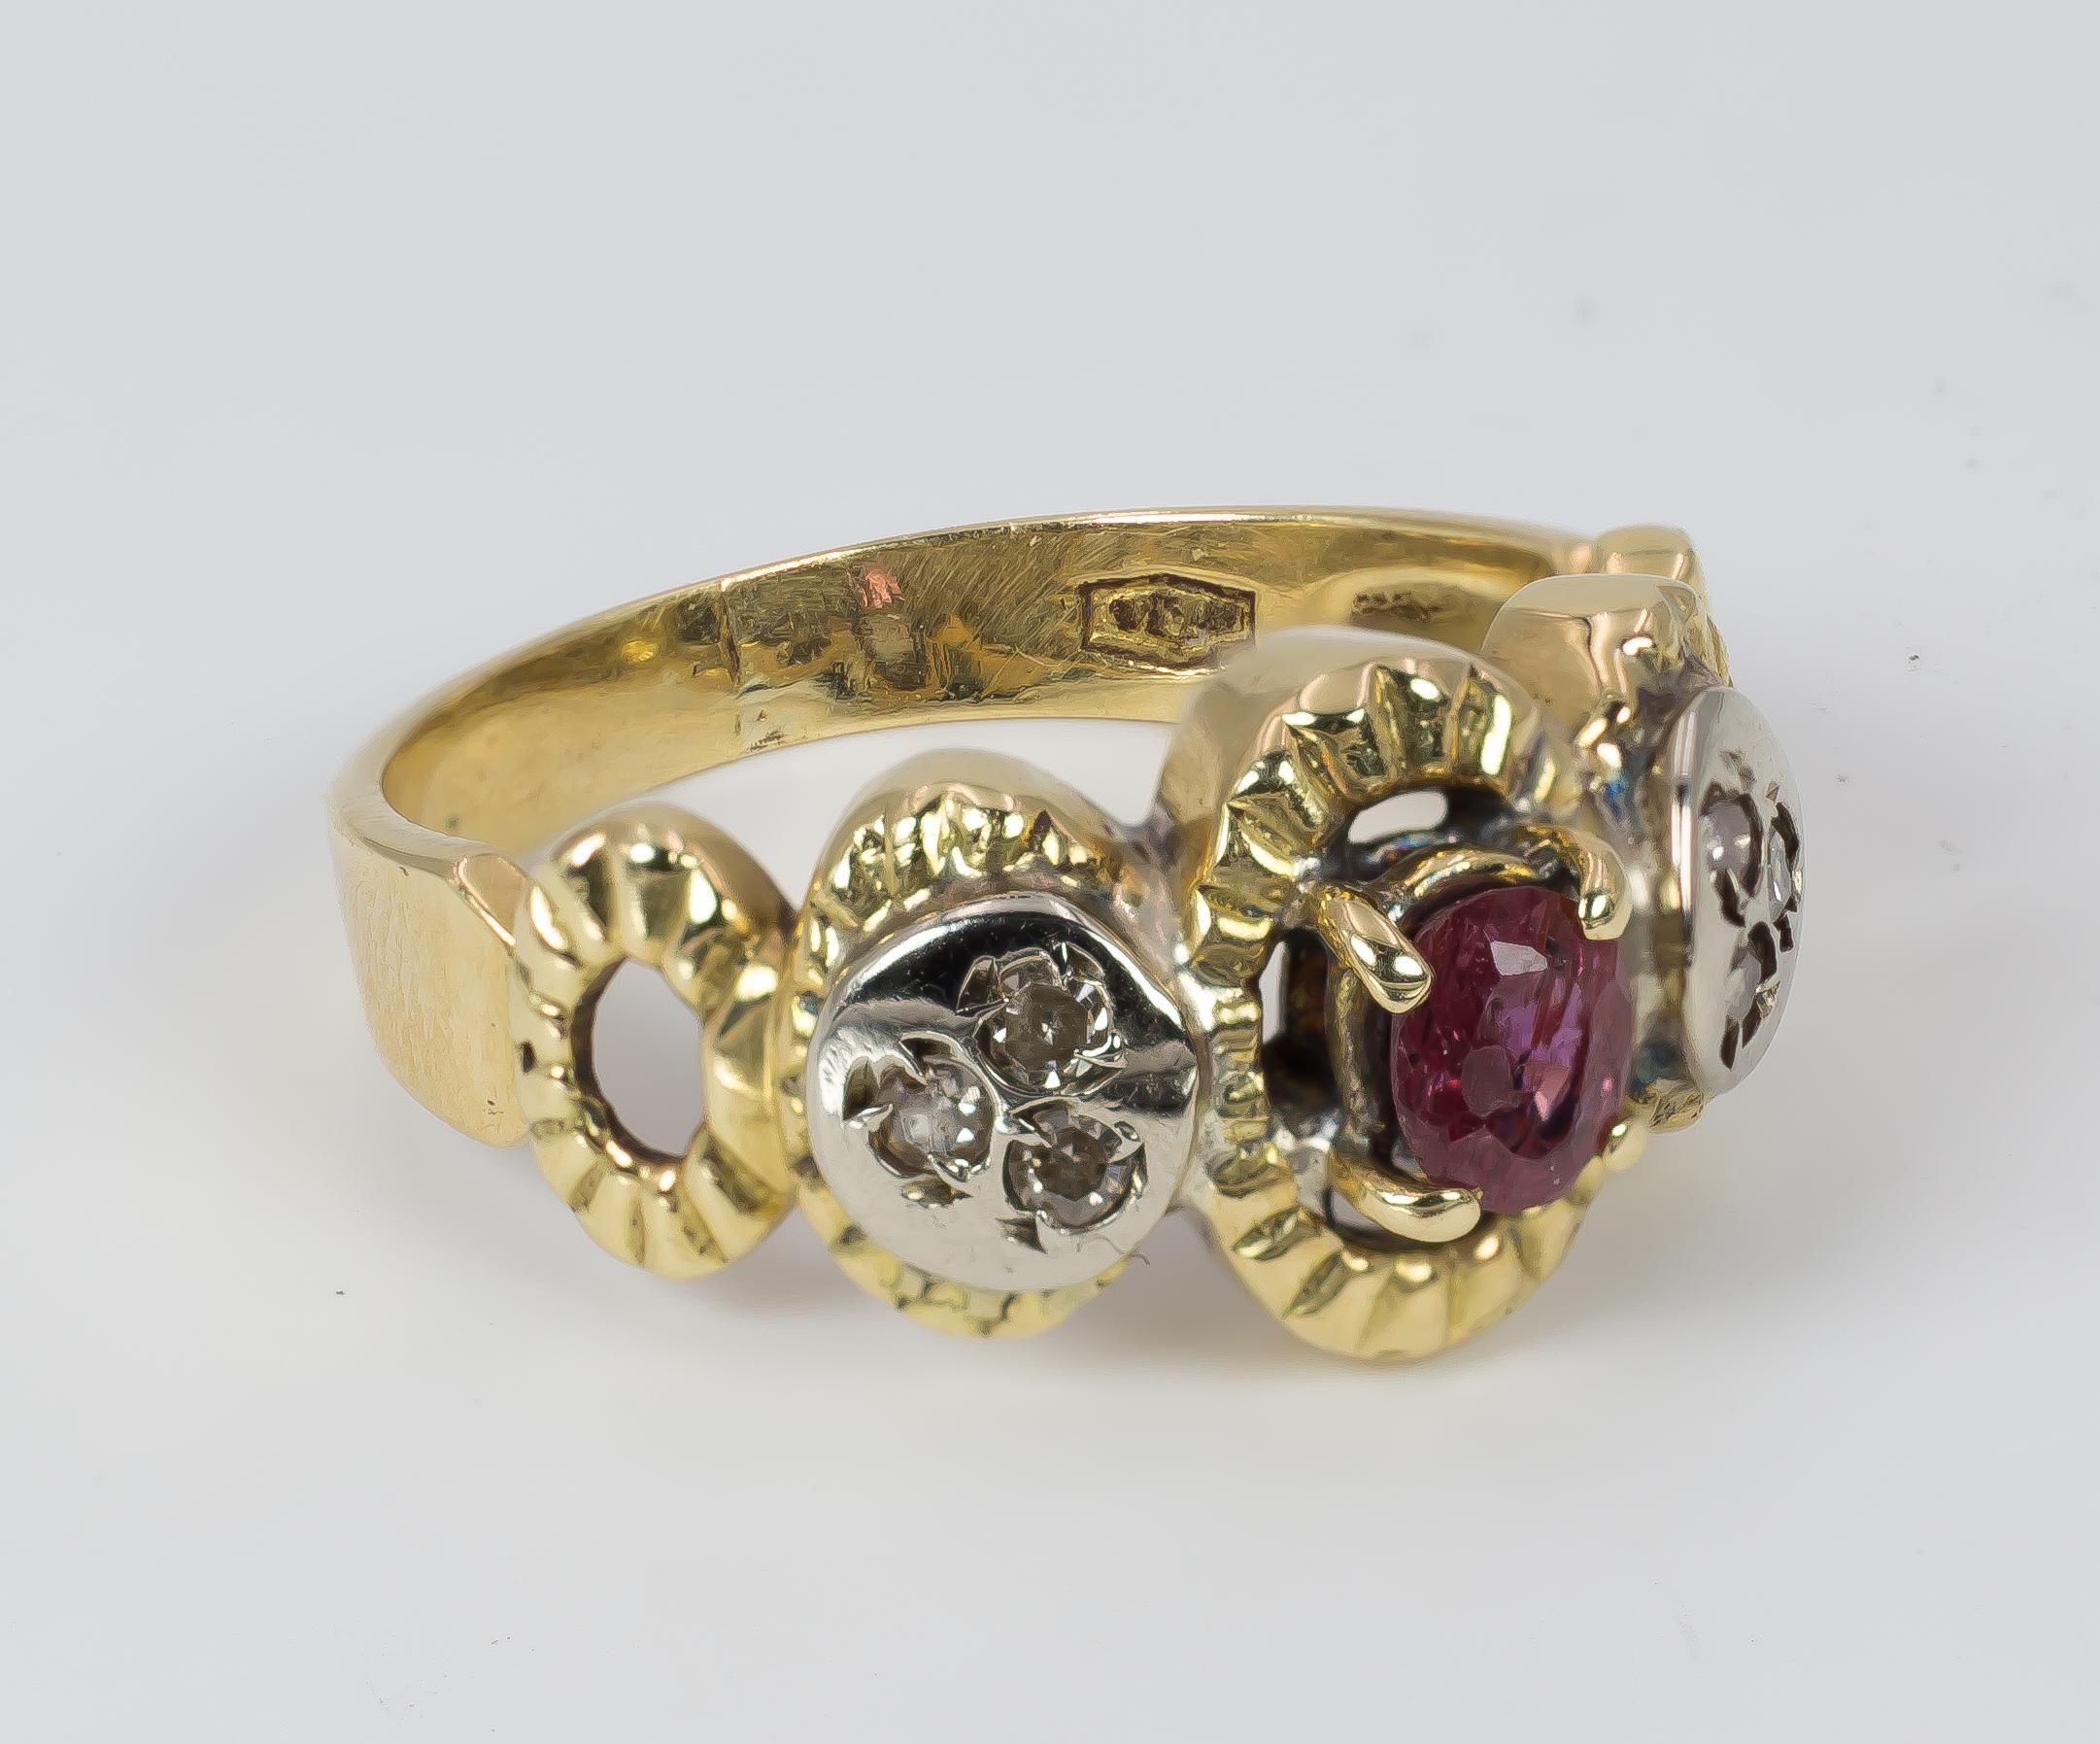 This beautiful vintage ring, dating from the 1970s, is set with a central ruby, flanked on either side by three rose cut diamonds. The ring is crafted in 18K gold throughout, and has a beautiful openwork to the shoulders. 

MATERIALS
18K gold, ruby